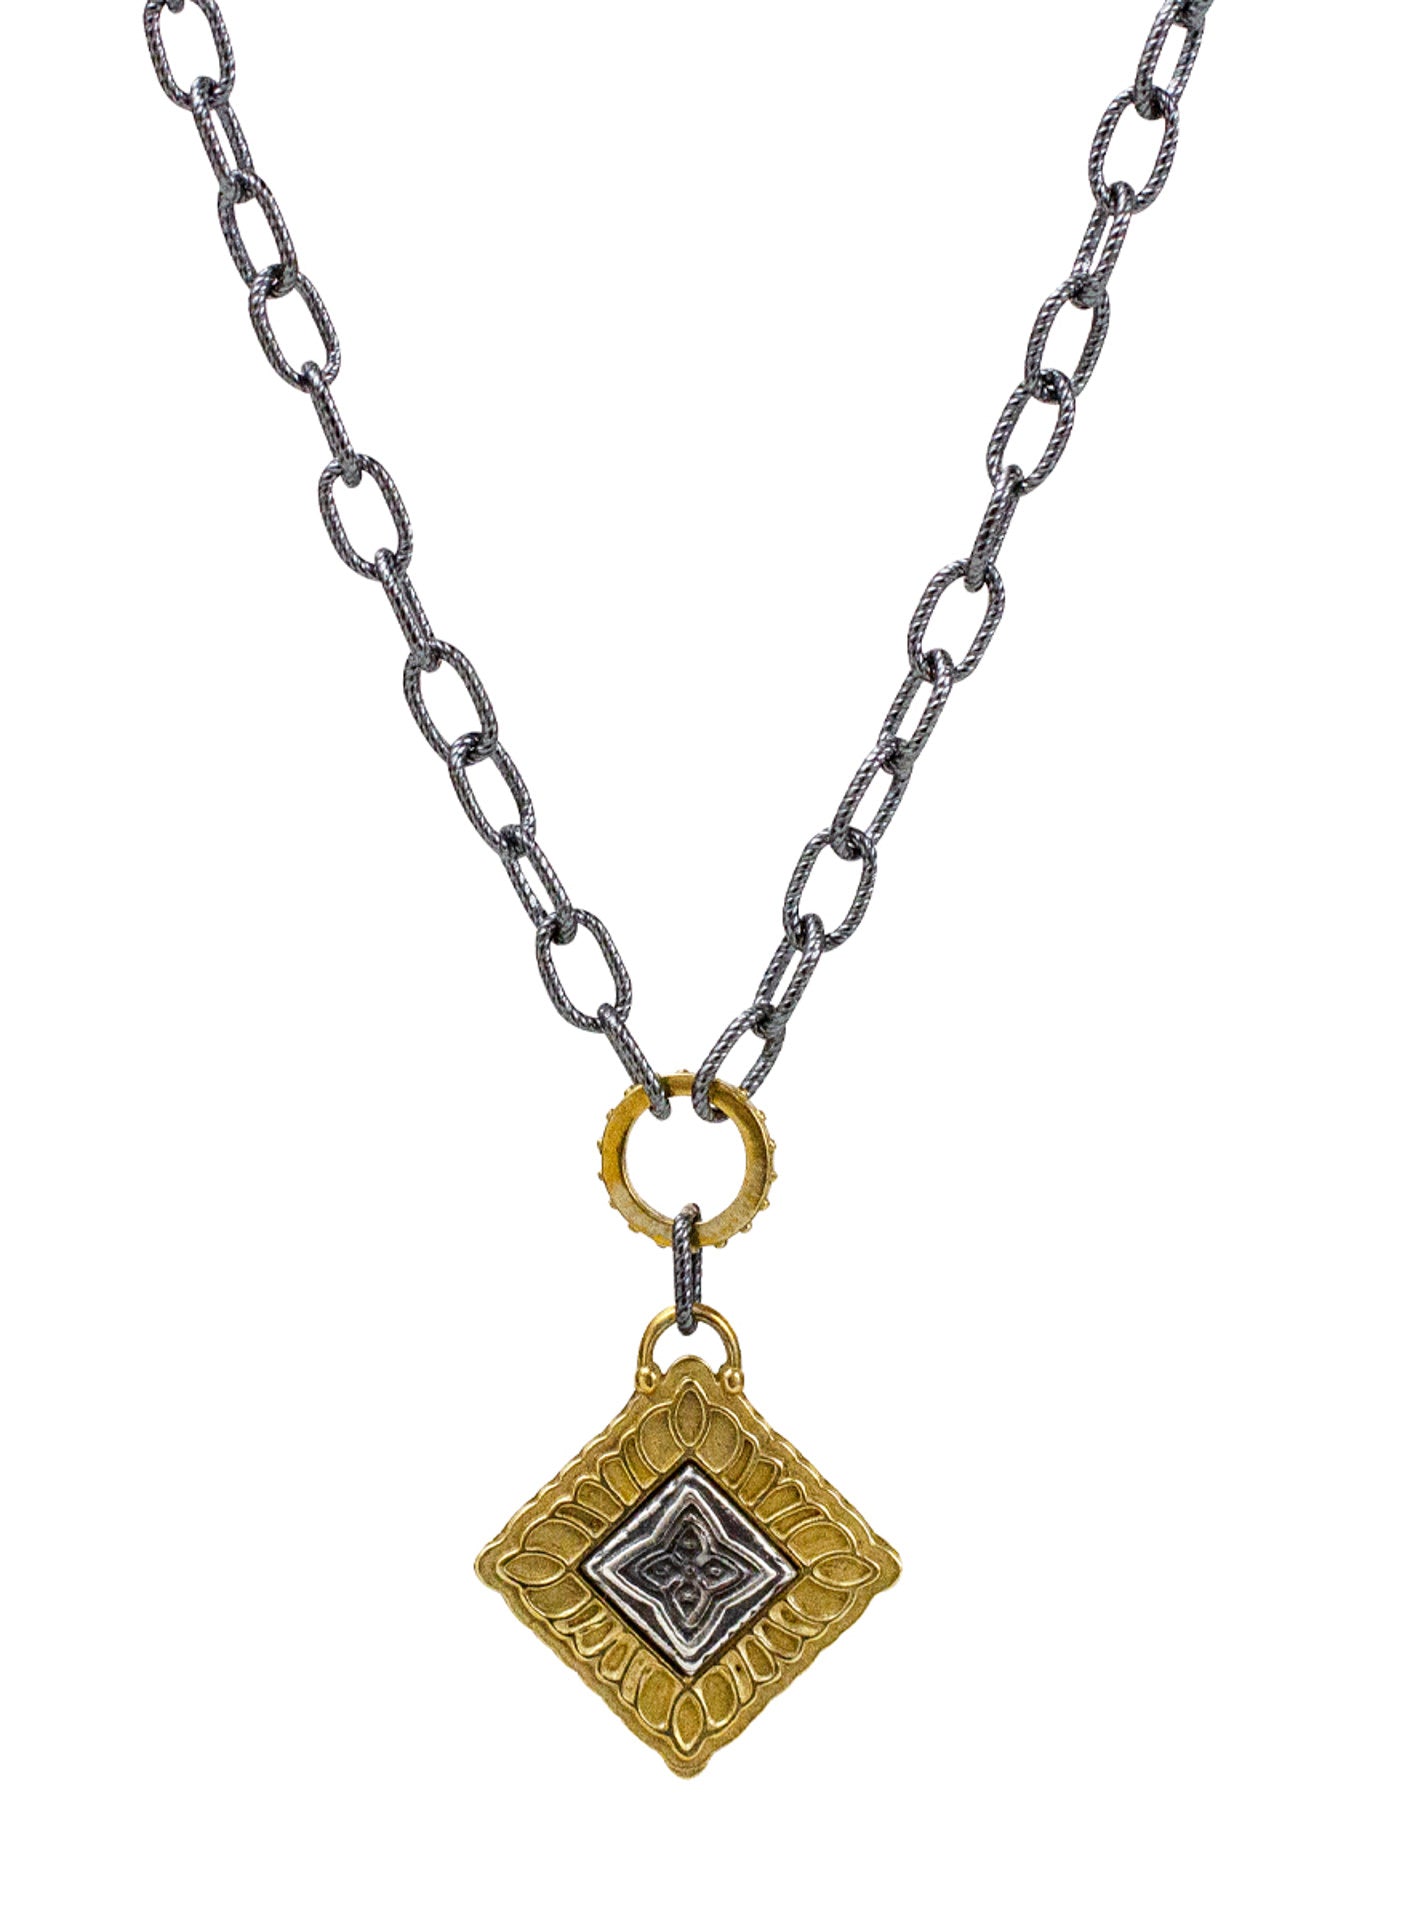 Channel Necklace - Sutra "evolve your mind"